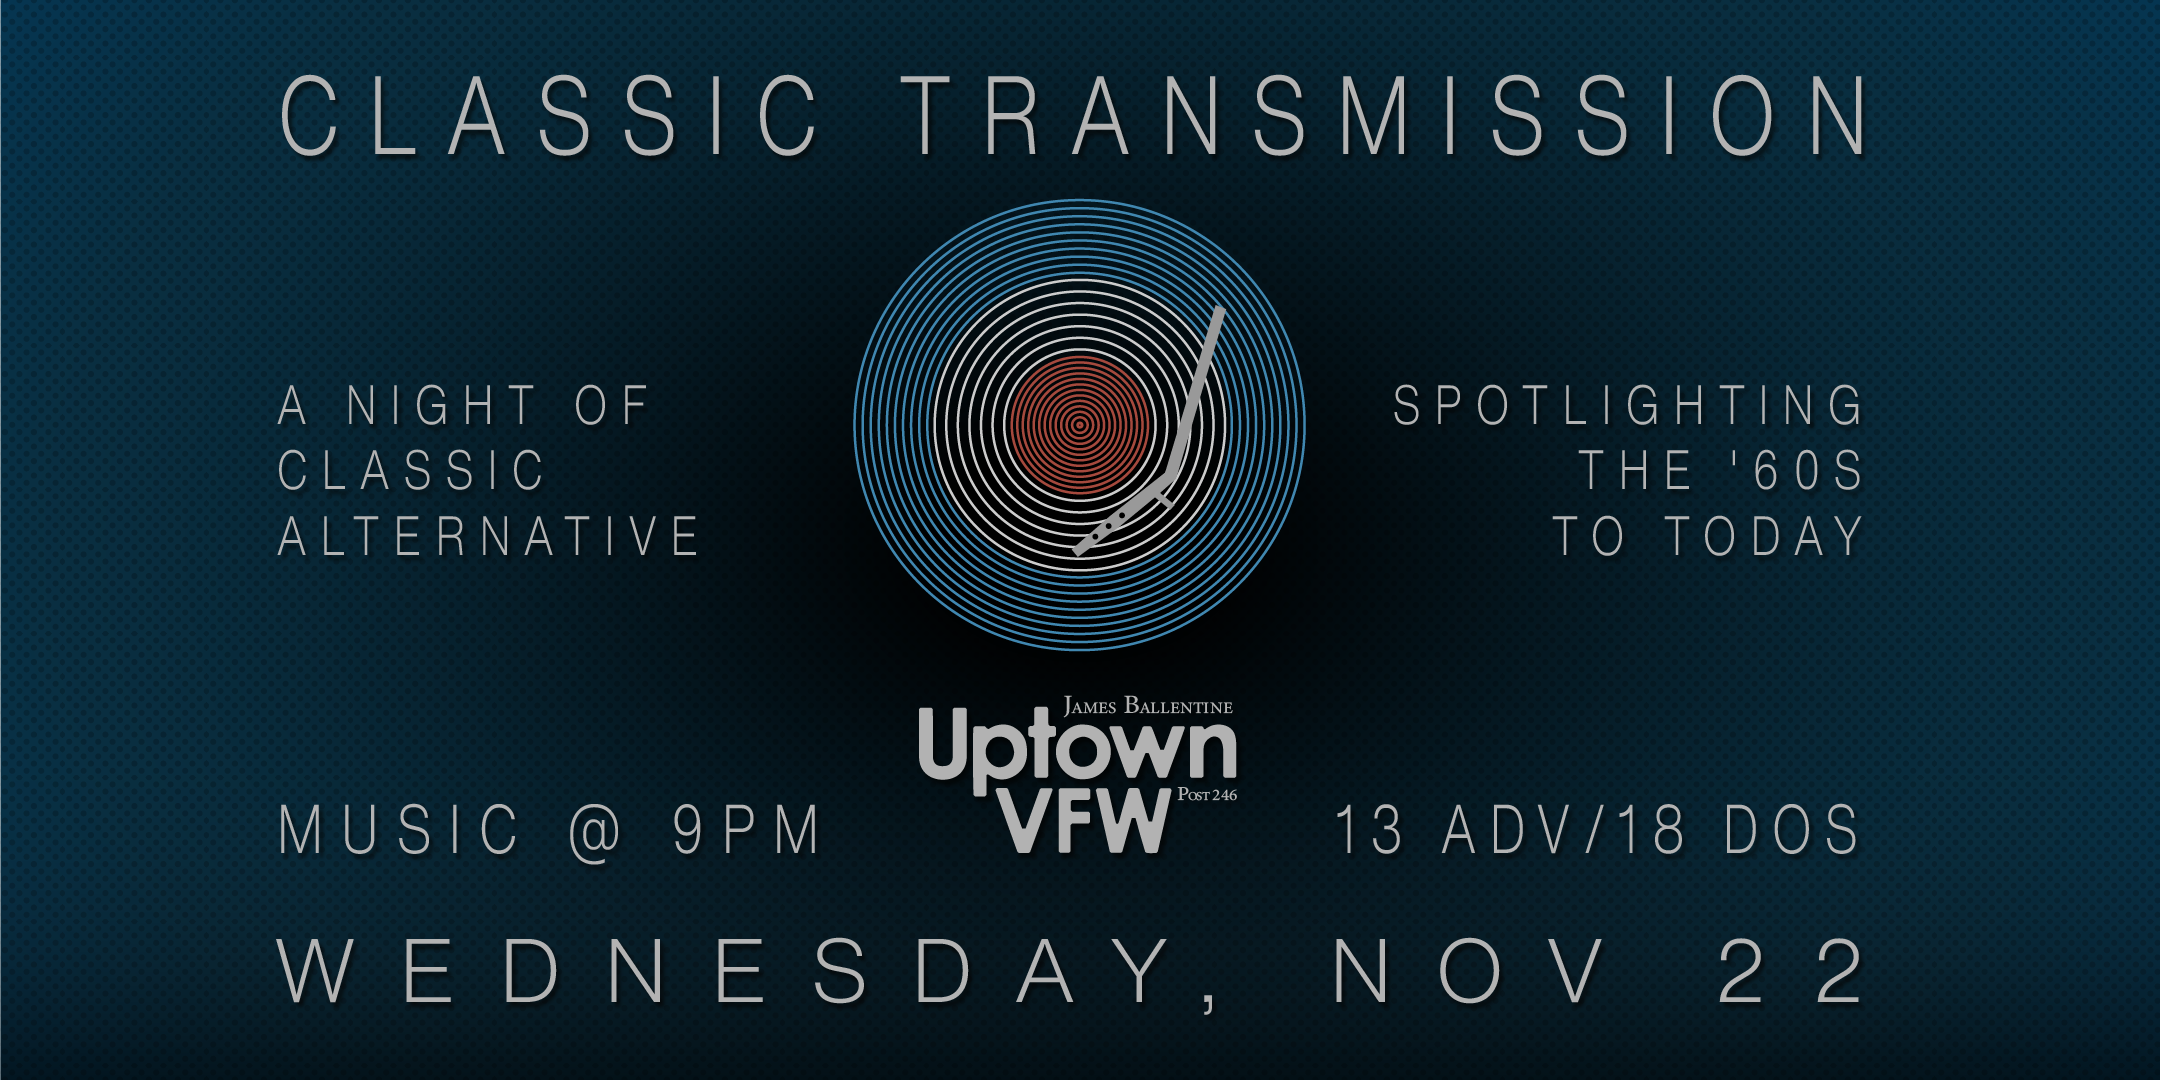 Classic Transmission A Night of Classic Alternative Spotlighting the 60's - today Wednesday, November 22 James Ballentine "Uptown" VFW Post 246 Doors 9:00pm :: Music 9:00pm :: 21+ $13 ADV / $18 DOS NO REFUNDS Tickets On-Sale Now